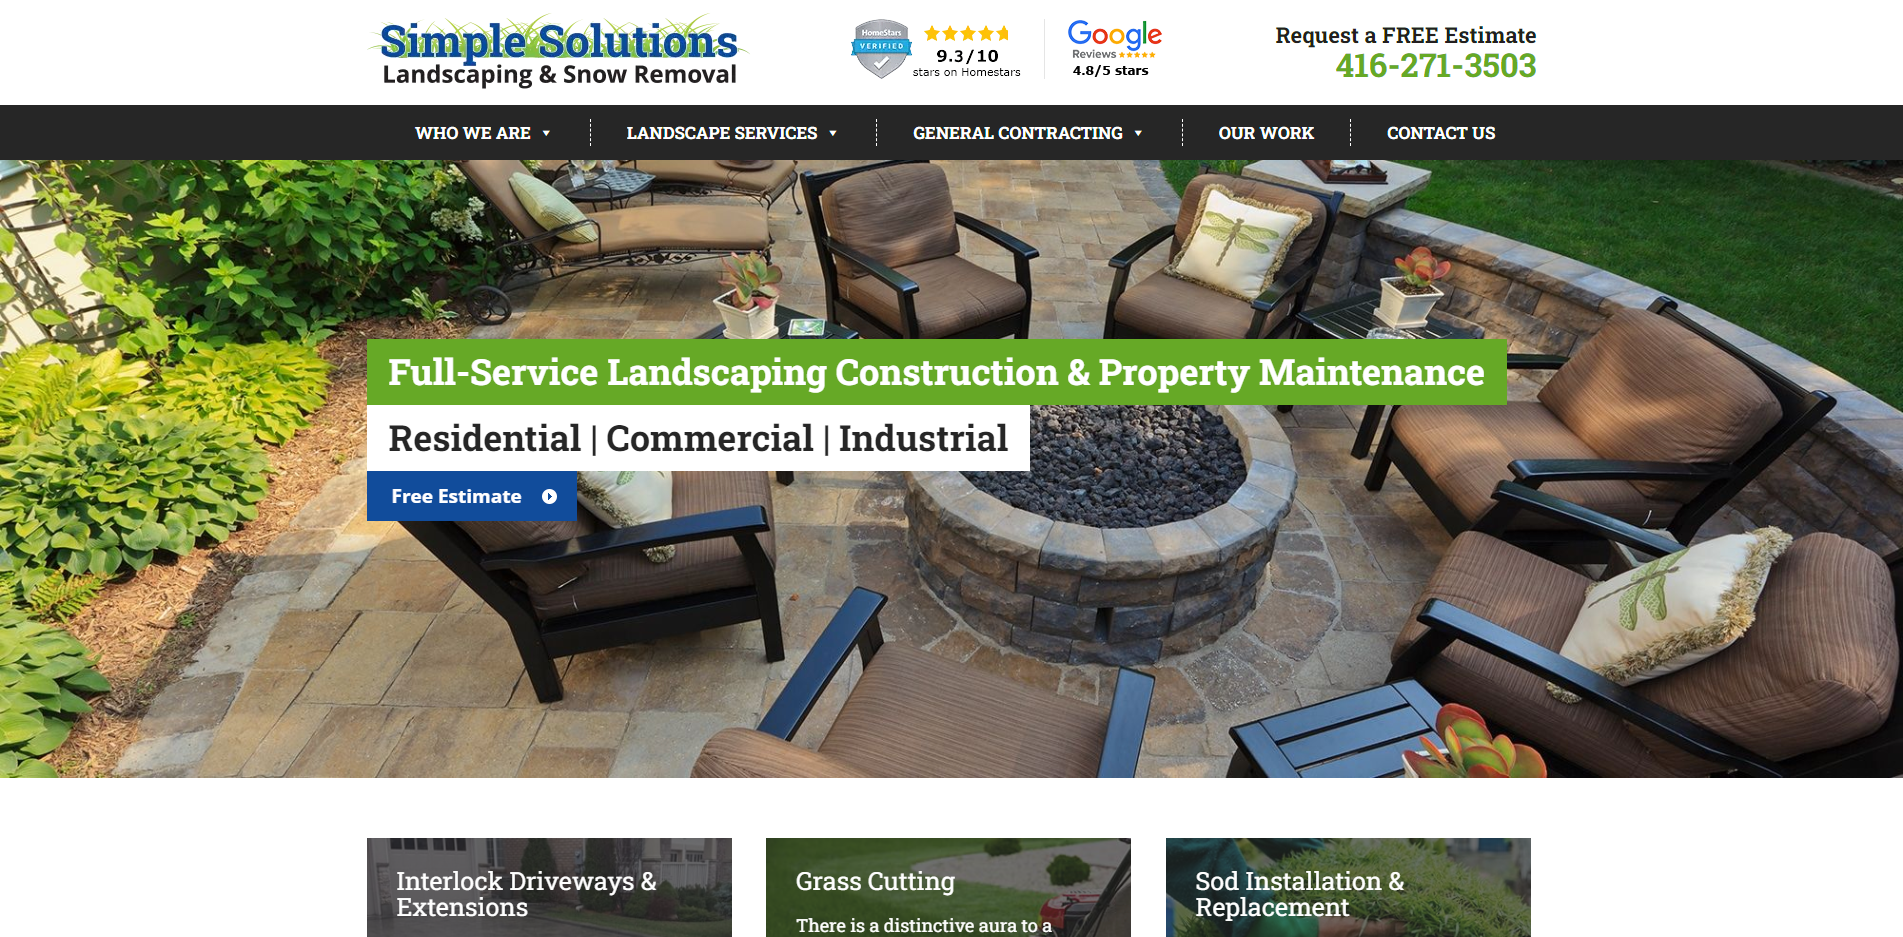 Simple Solutions Landscaping & Snow Removal image